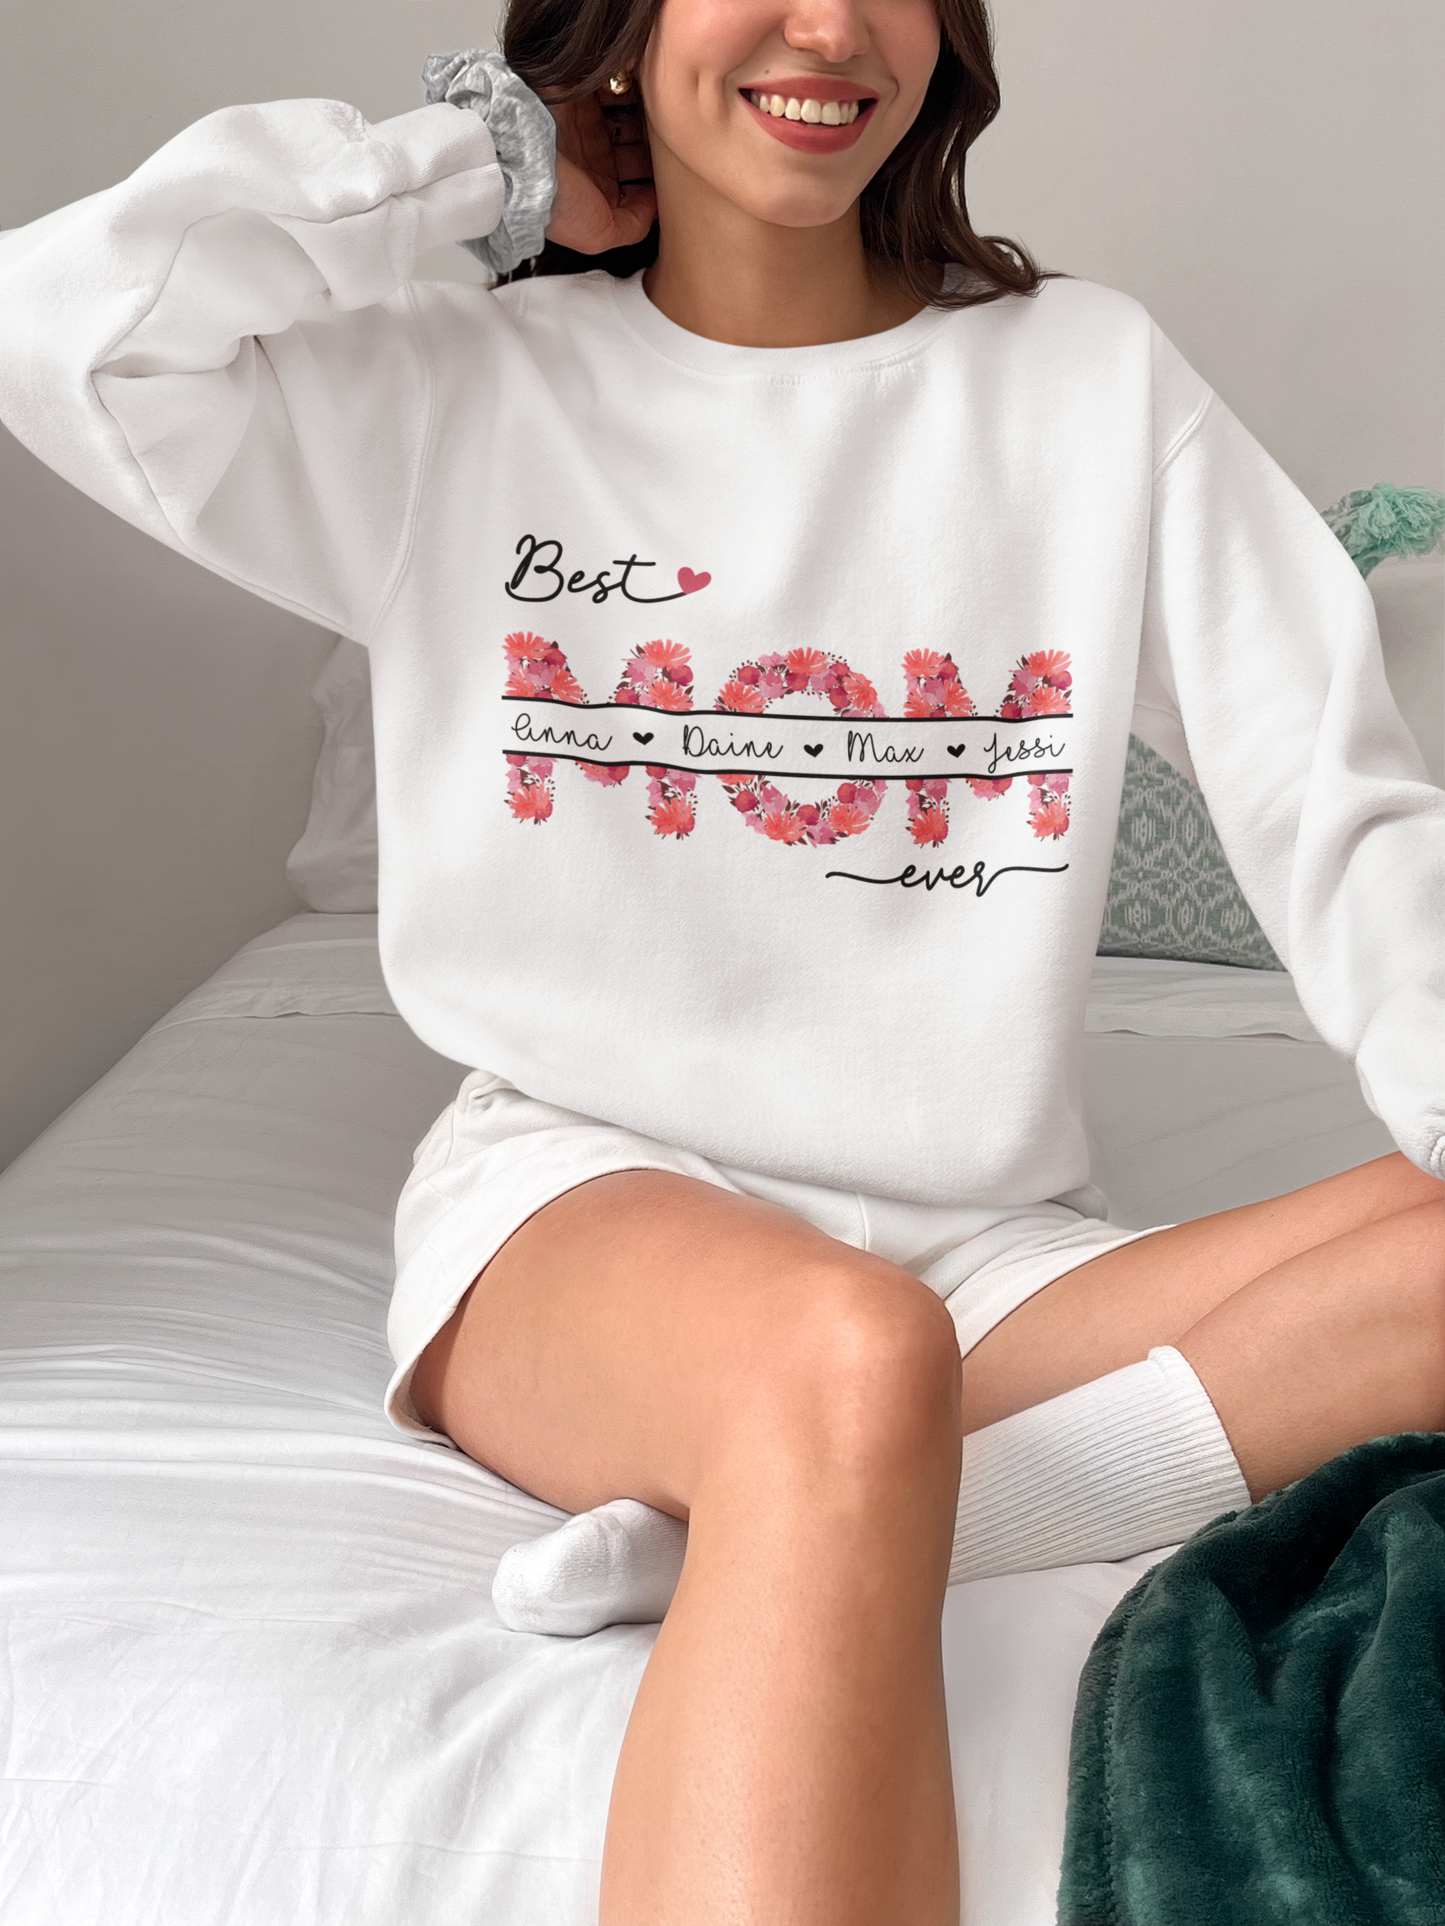 Retro Best Mom Ever Sweatshirt, Mommio Lover Sweatshirt, Best Mom Ever Sweatshirt, Gift for Mom Sweatshirt, Retro Mom Sweatshirt, Custom Mama Shirt, Mom Shirt With Names, Personalized Mama T-shirt